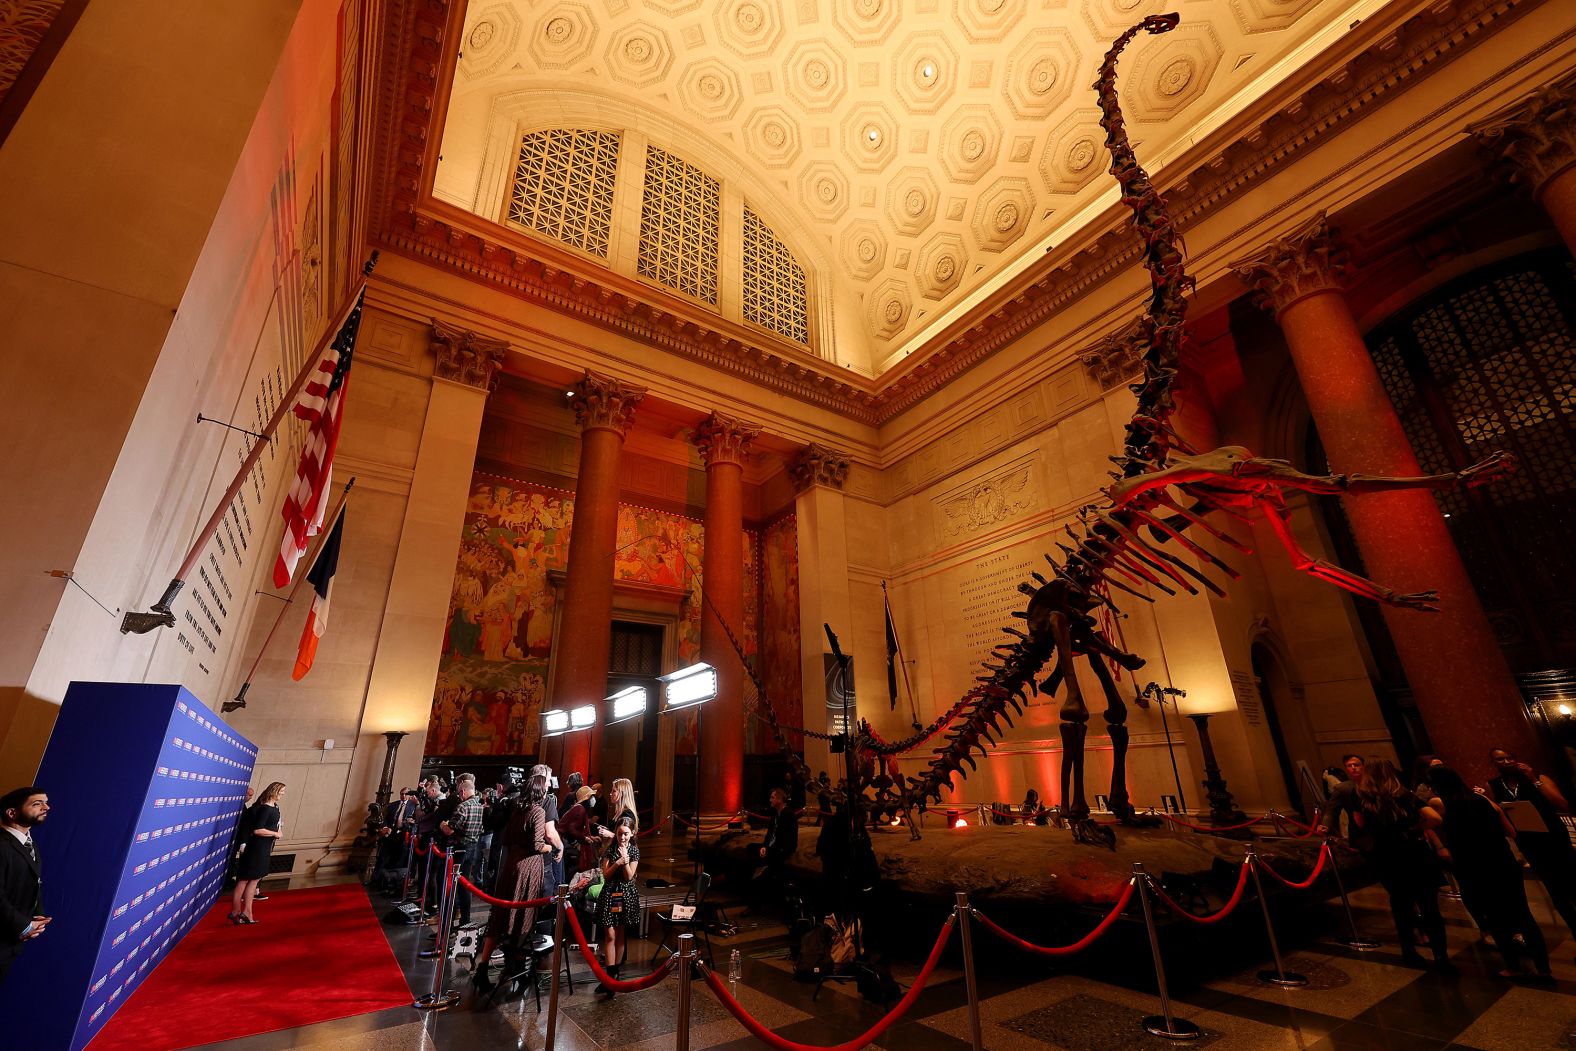 Guests arrive at the American Museum of Natural History.